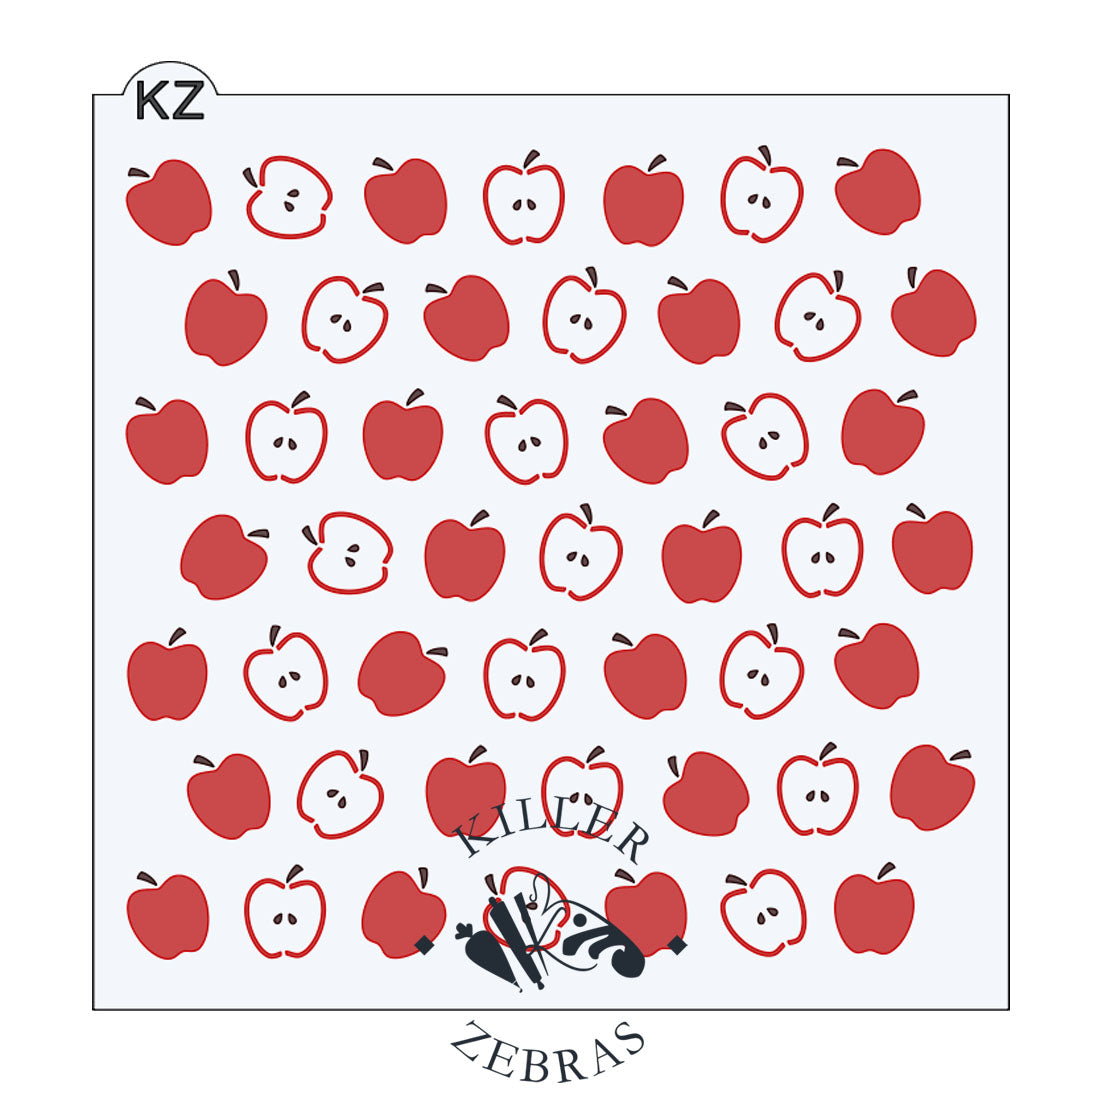 Large, square stencil with red apples. Alternating columns of whole and half apples.